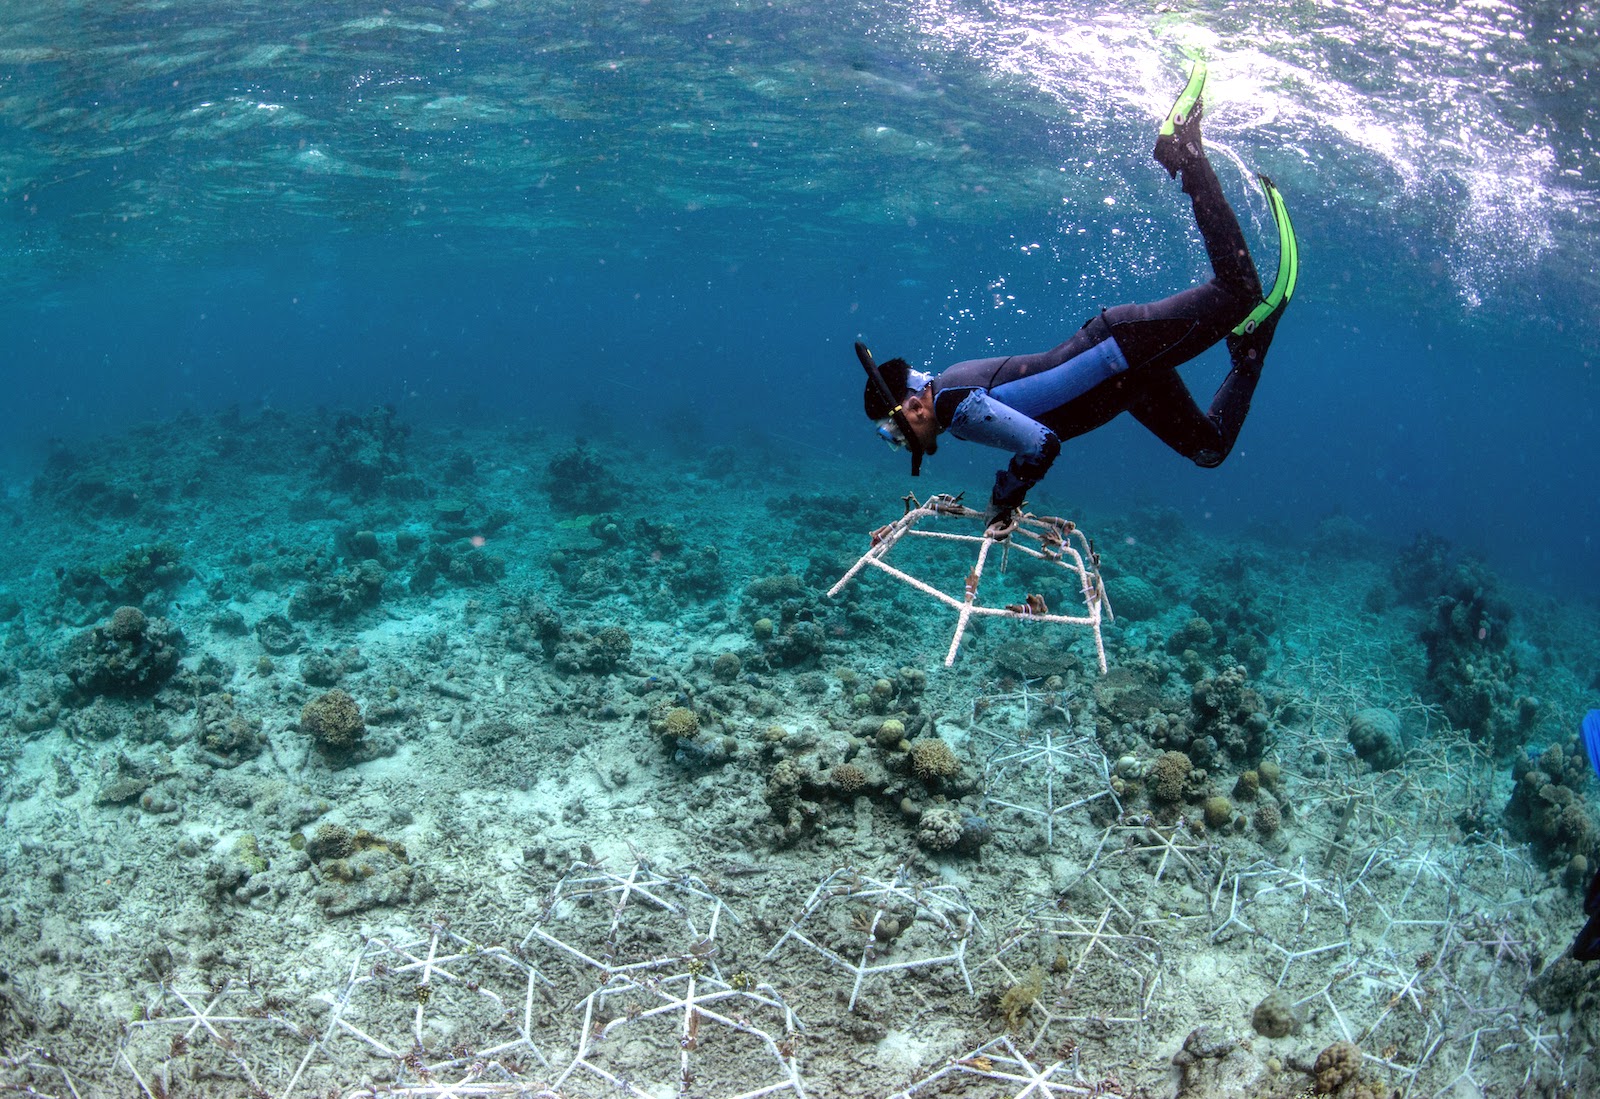 ‘Reef stars’ restored Indonesia’s blast-damaged corals in just 4 years